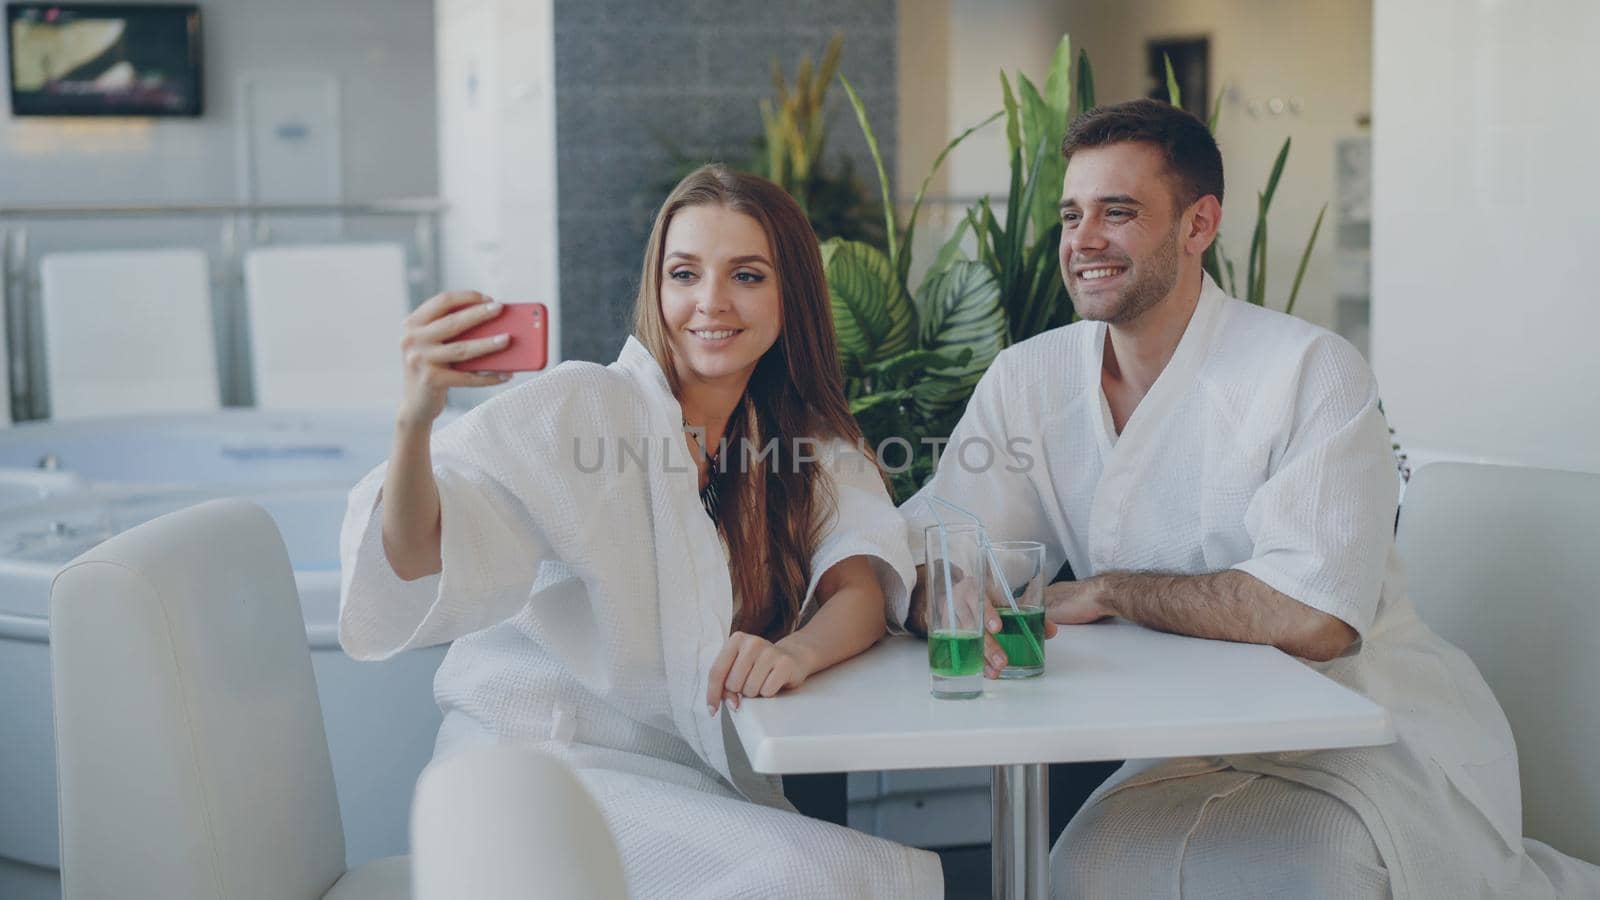 Pretty girl and her loving boyfriend are taking selfie with cocktail glasses using smartphone while relaxing in spa salon. They are smiling and posing looking at camera. by silverkblack